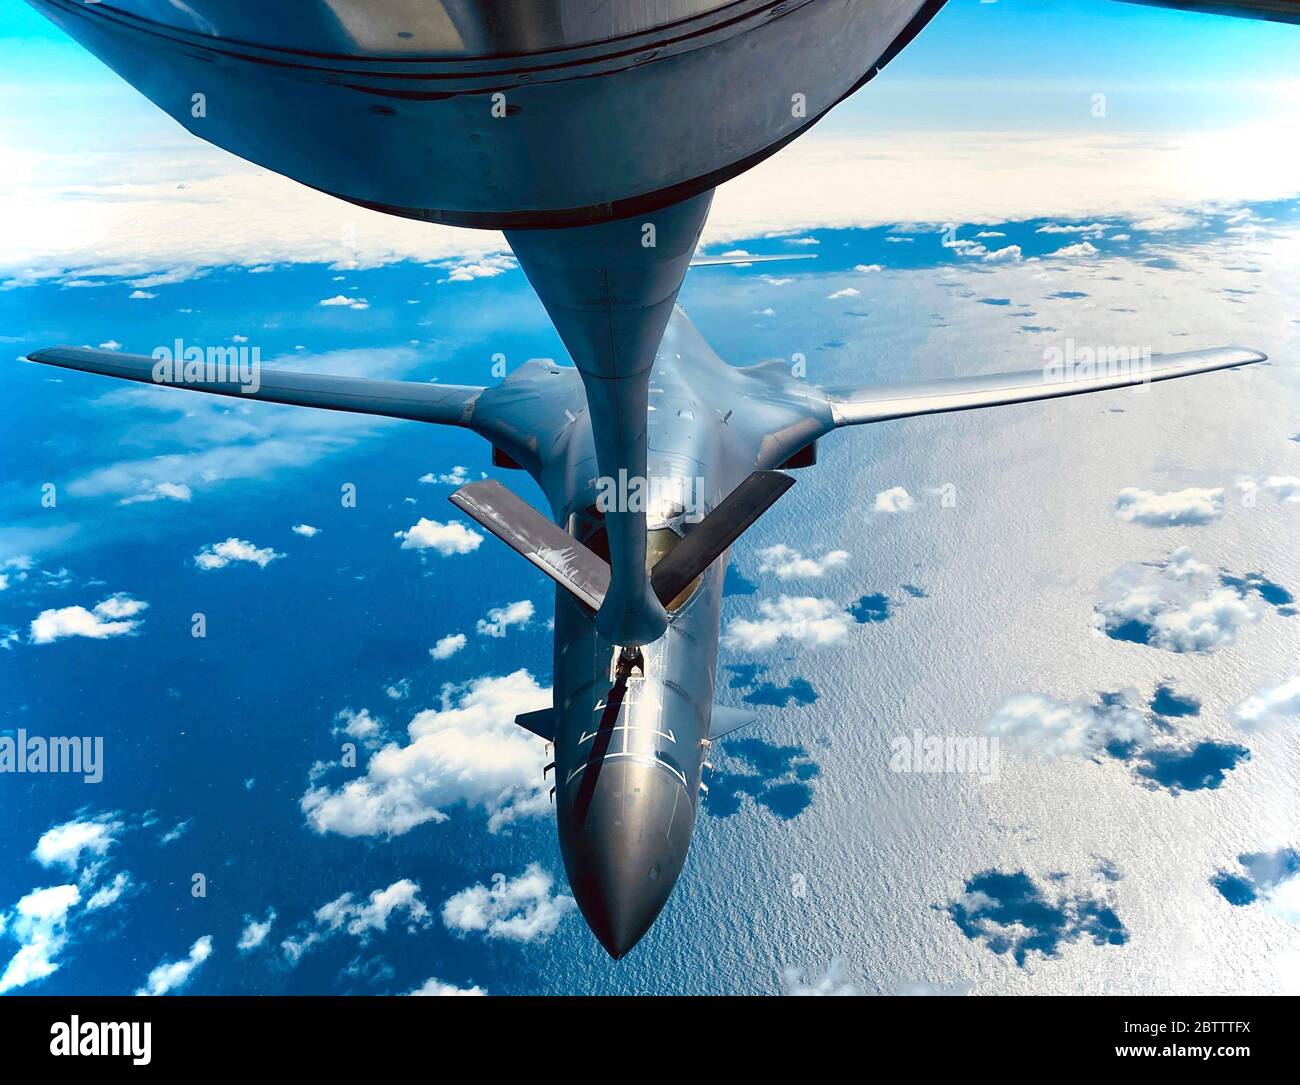 A U.S. Air Force B-1B Lancer stealth bomber aircraft from the 28th Bomb Wing, refuels from a KC-135 Stratotanker aircraft May 21, 2020 over England. Stock Photo